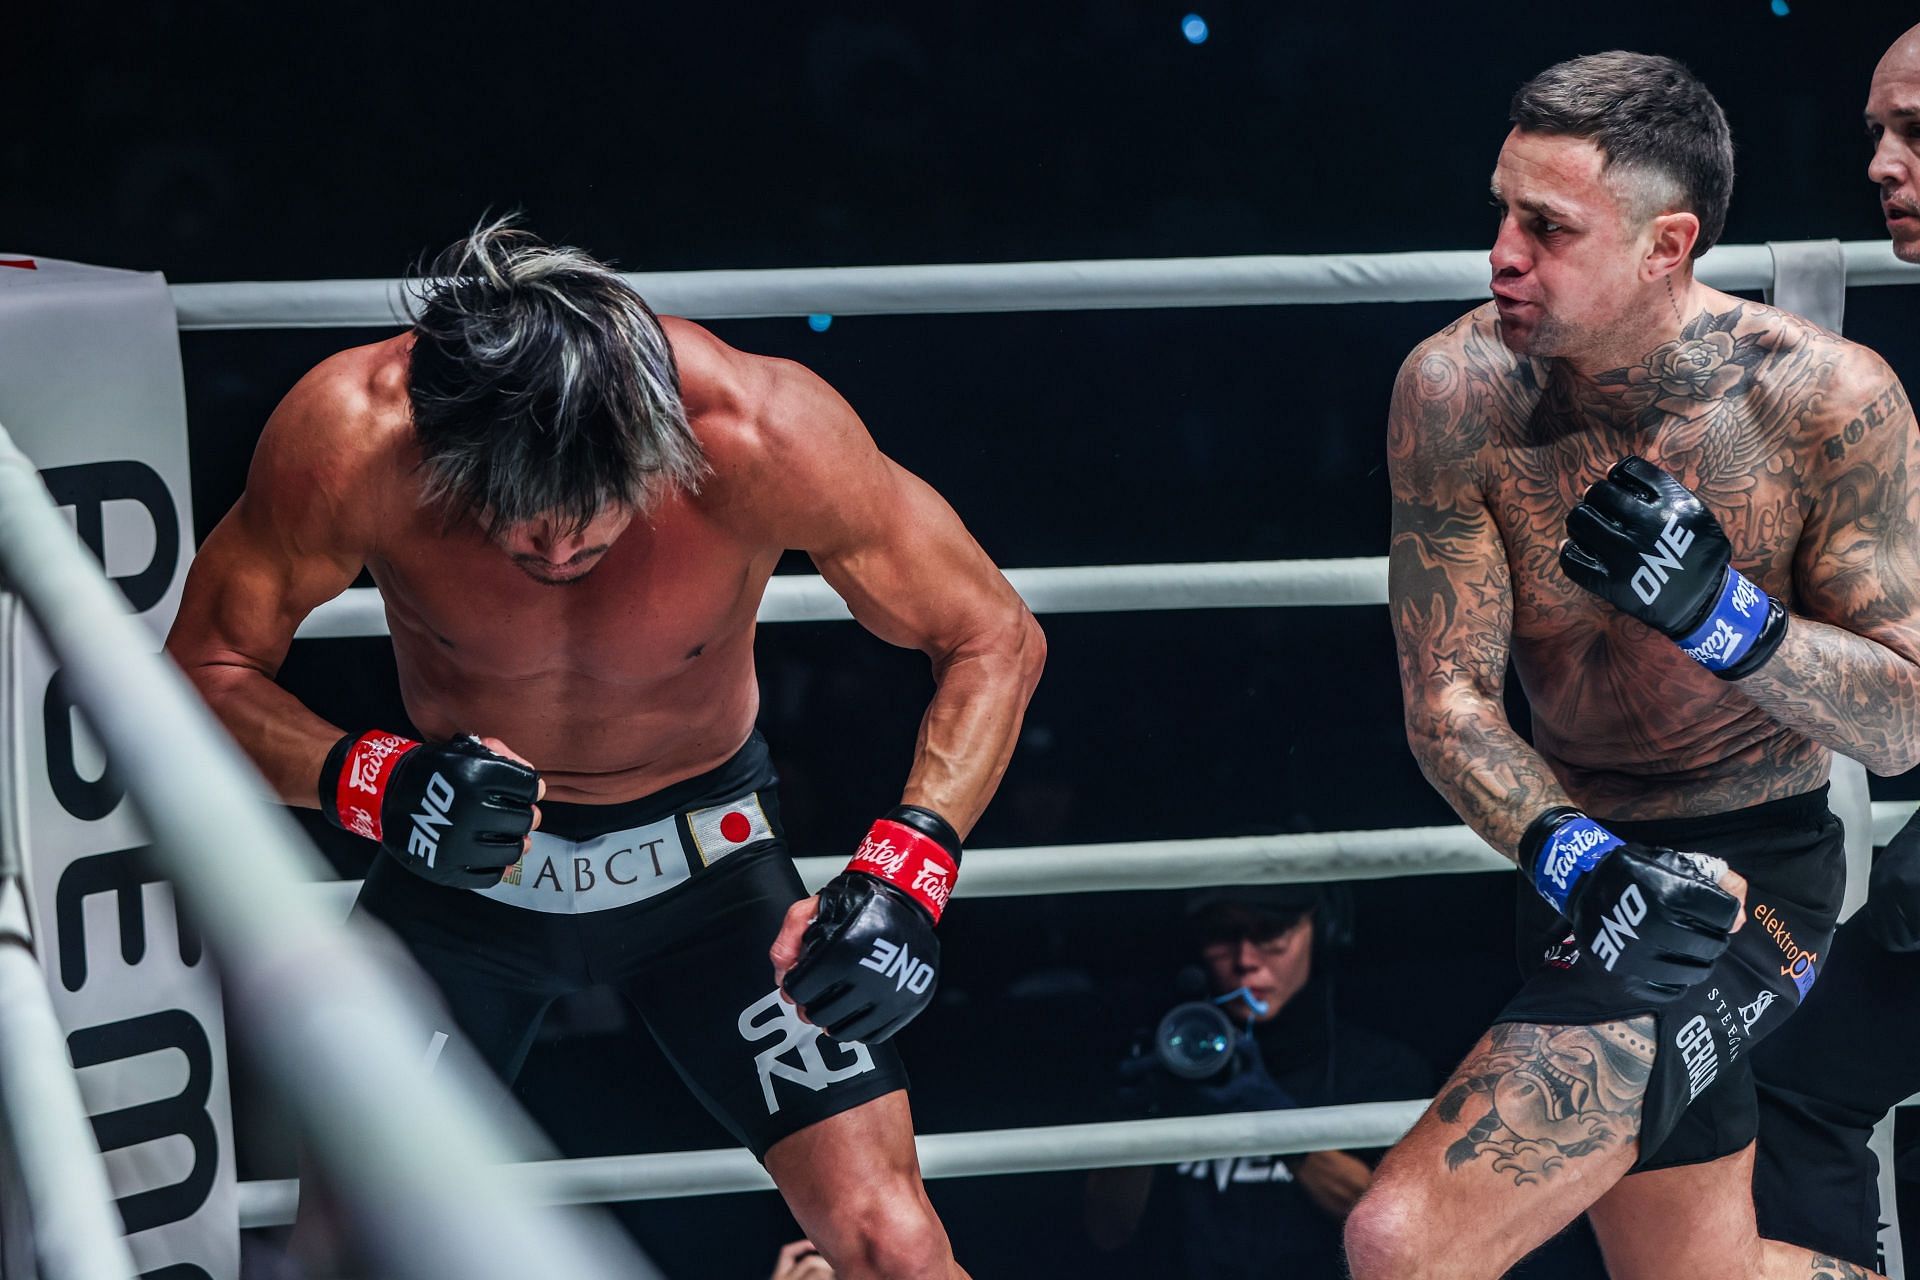 Nieky Holzken lands a punch on Sexyama.